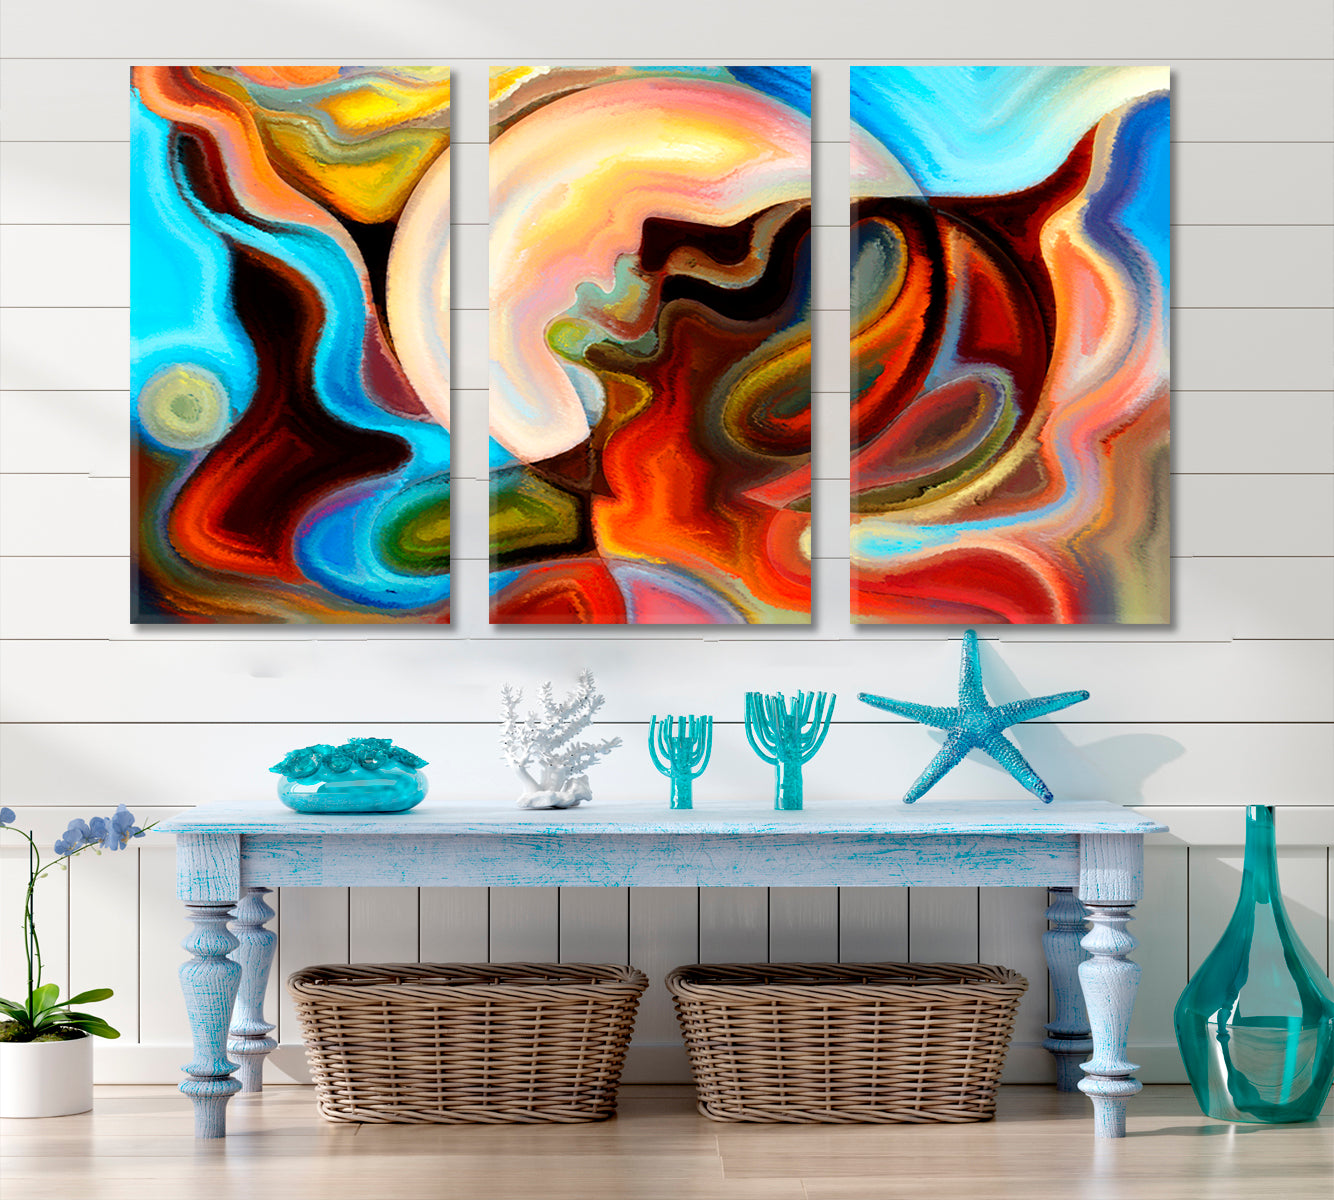 Human Face and Colors Colorful Abstraction Consciousness Art Artesty 3 panels 36" x 24" 